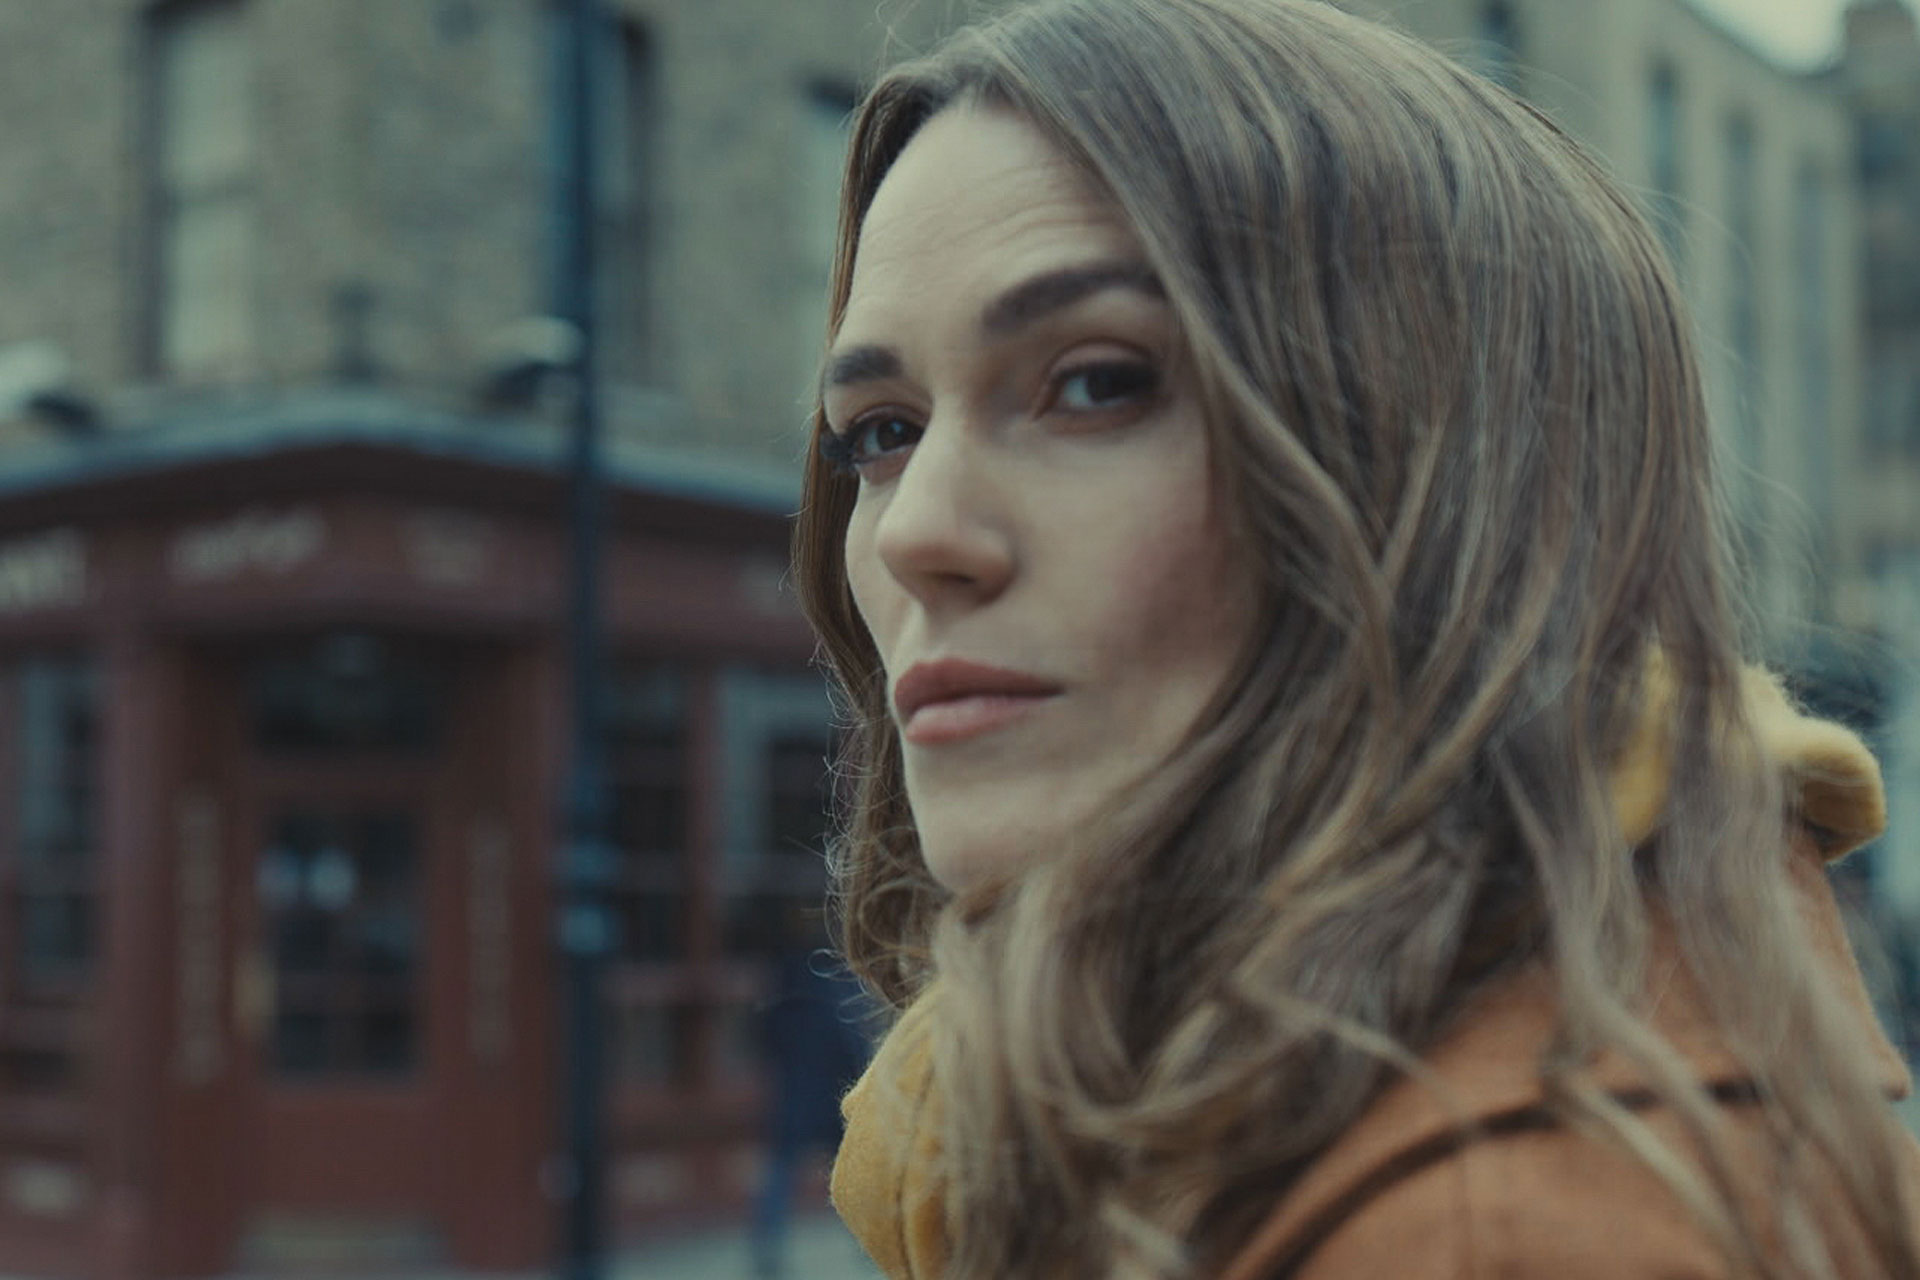 Black Doves, Starring Keira Knightley & Sarah Lancashire: Everything We Know So Far